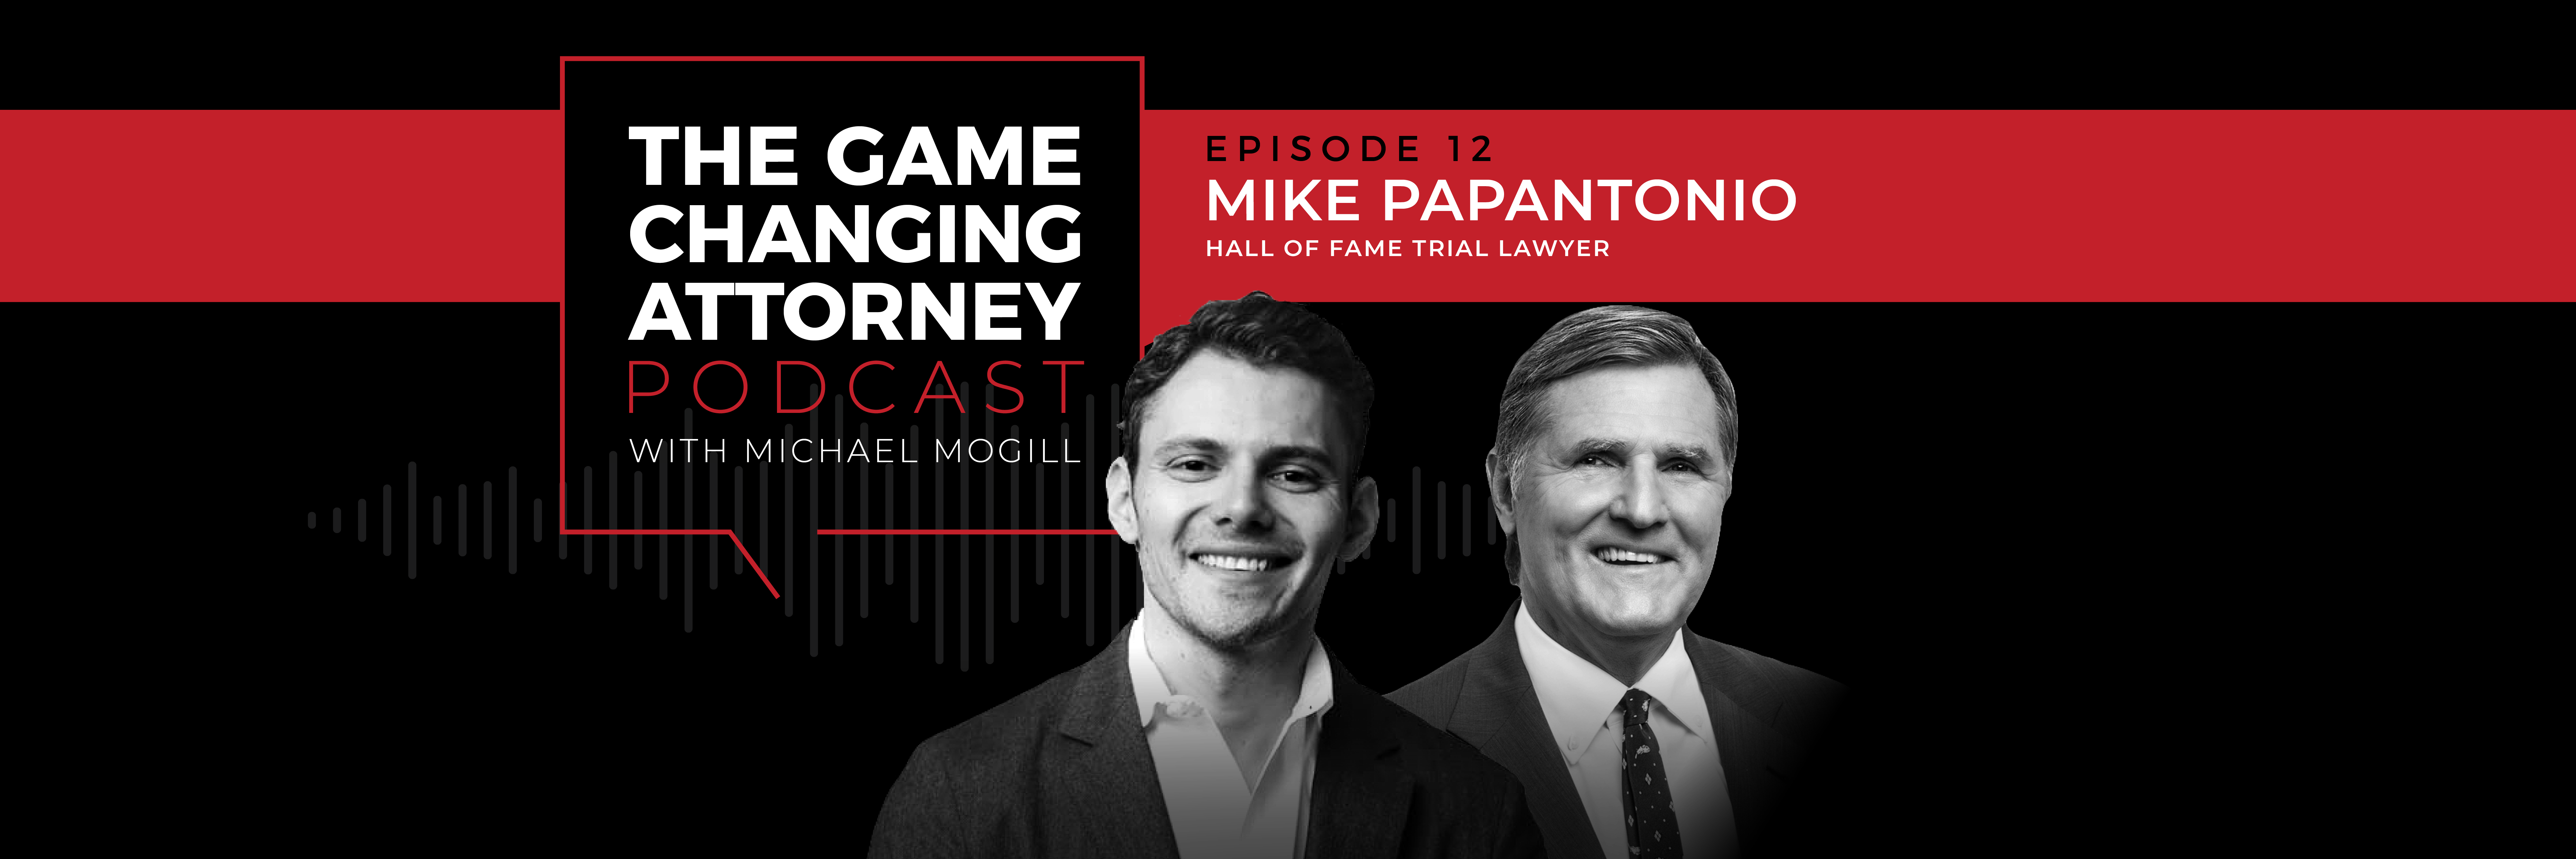 Mike Papantonio - The Game Changing Attorney Podcast - Desktop